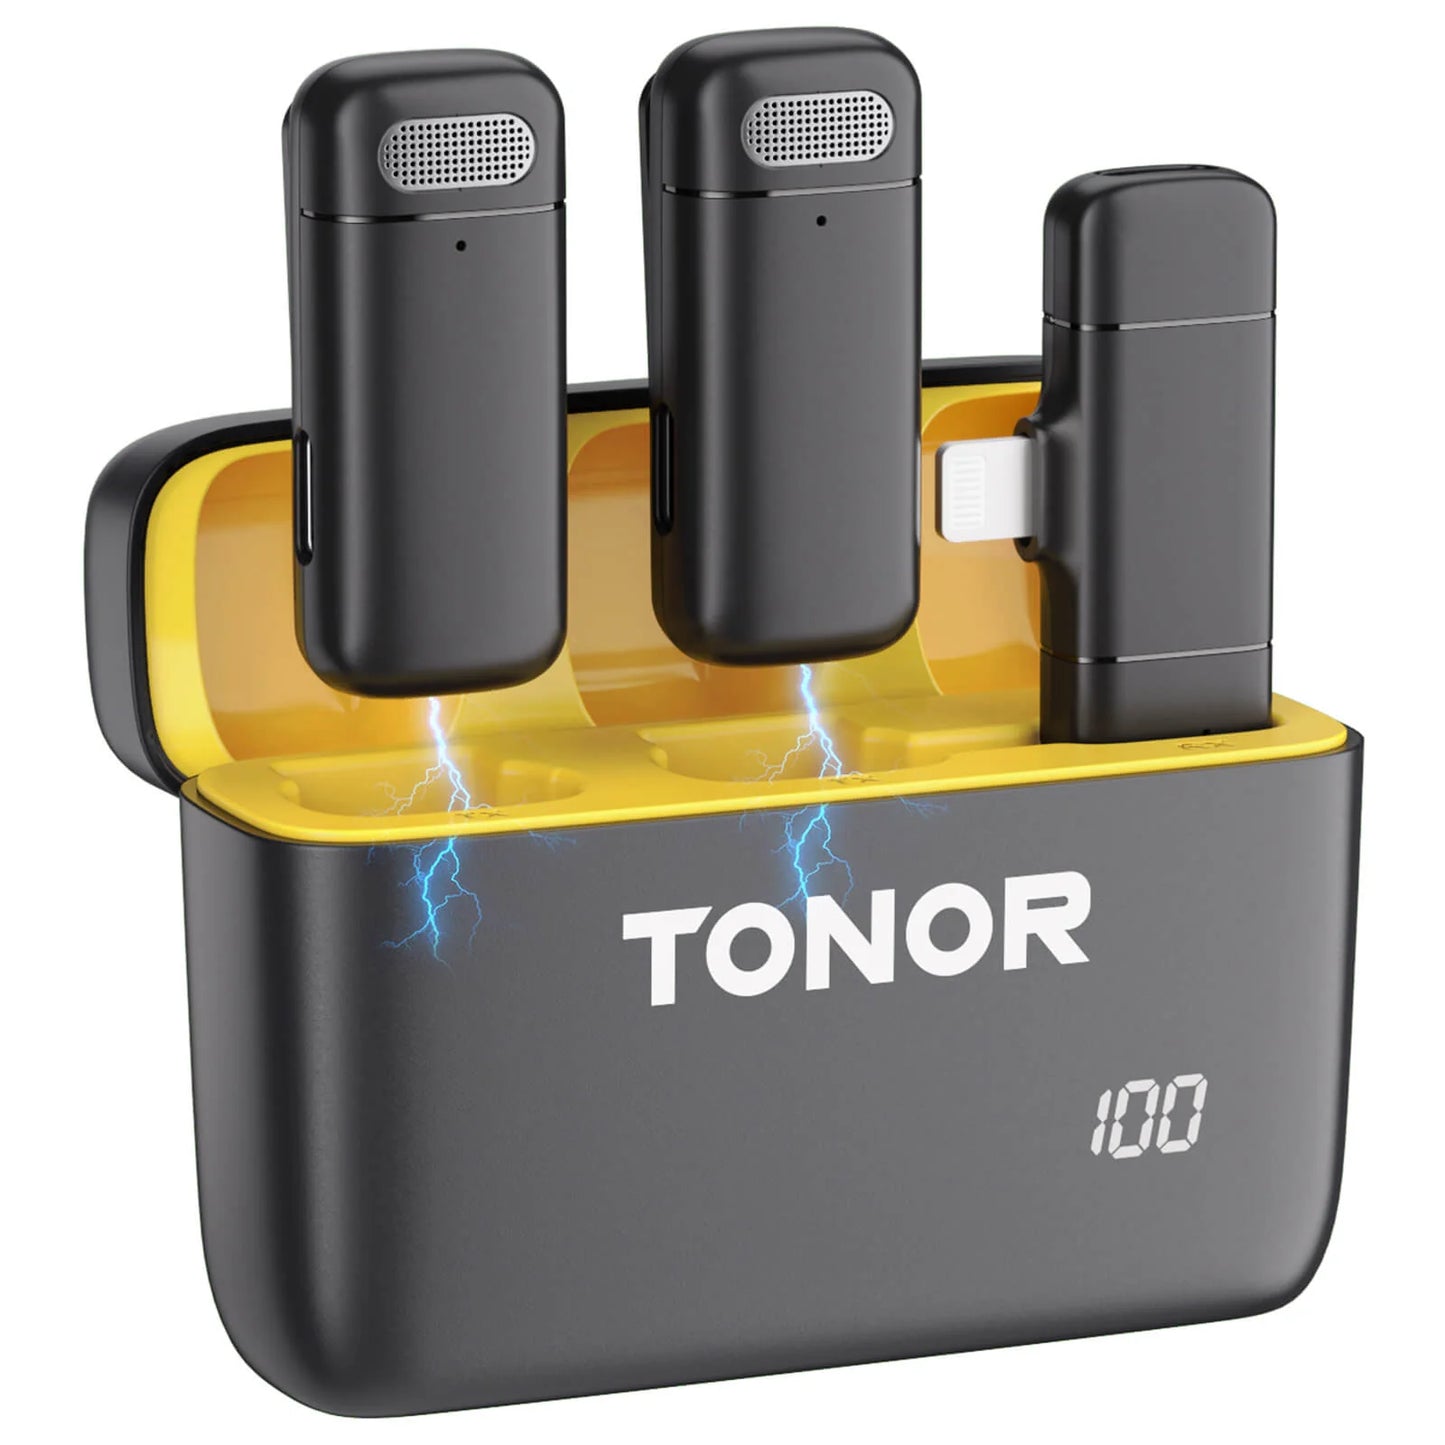 TONOR wireless lavalier microphone is suitable for iPhone/iPad/Android mobile phones